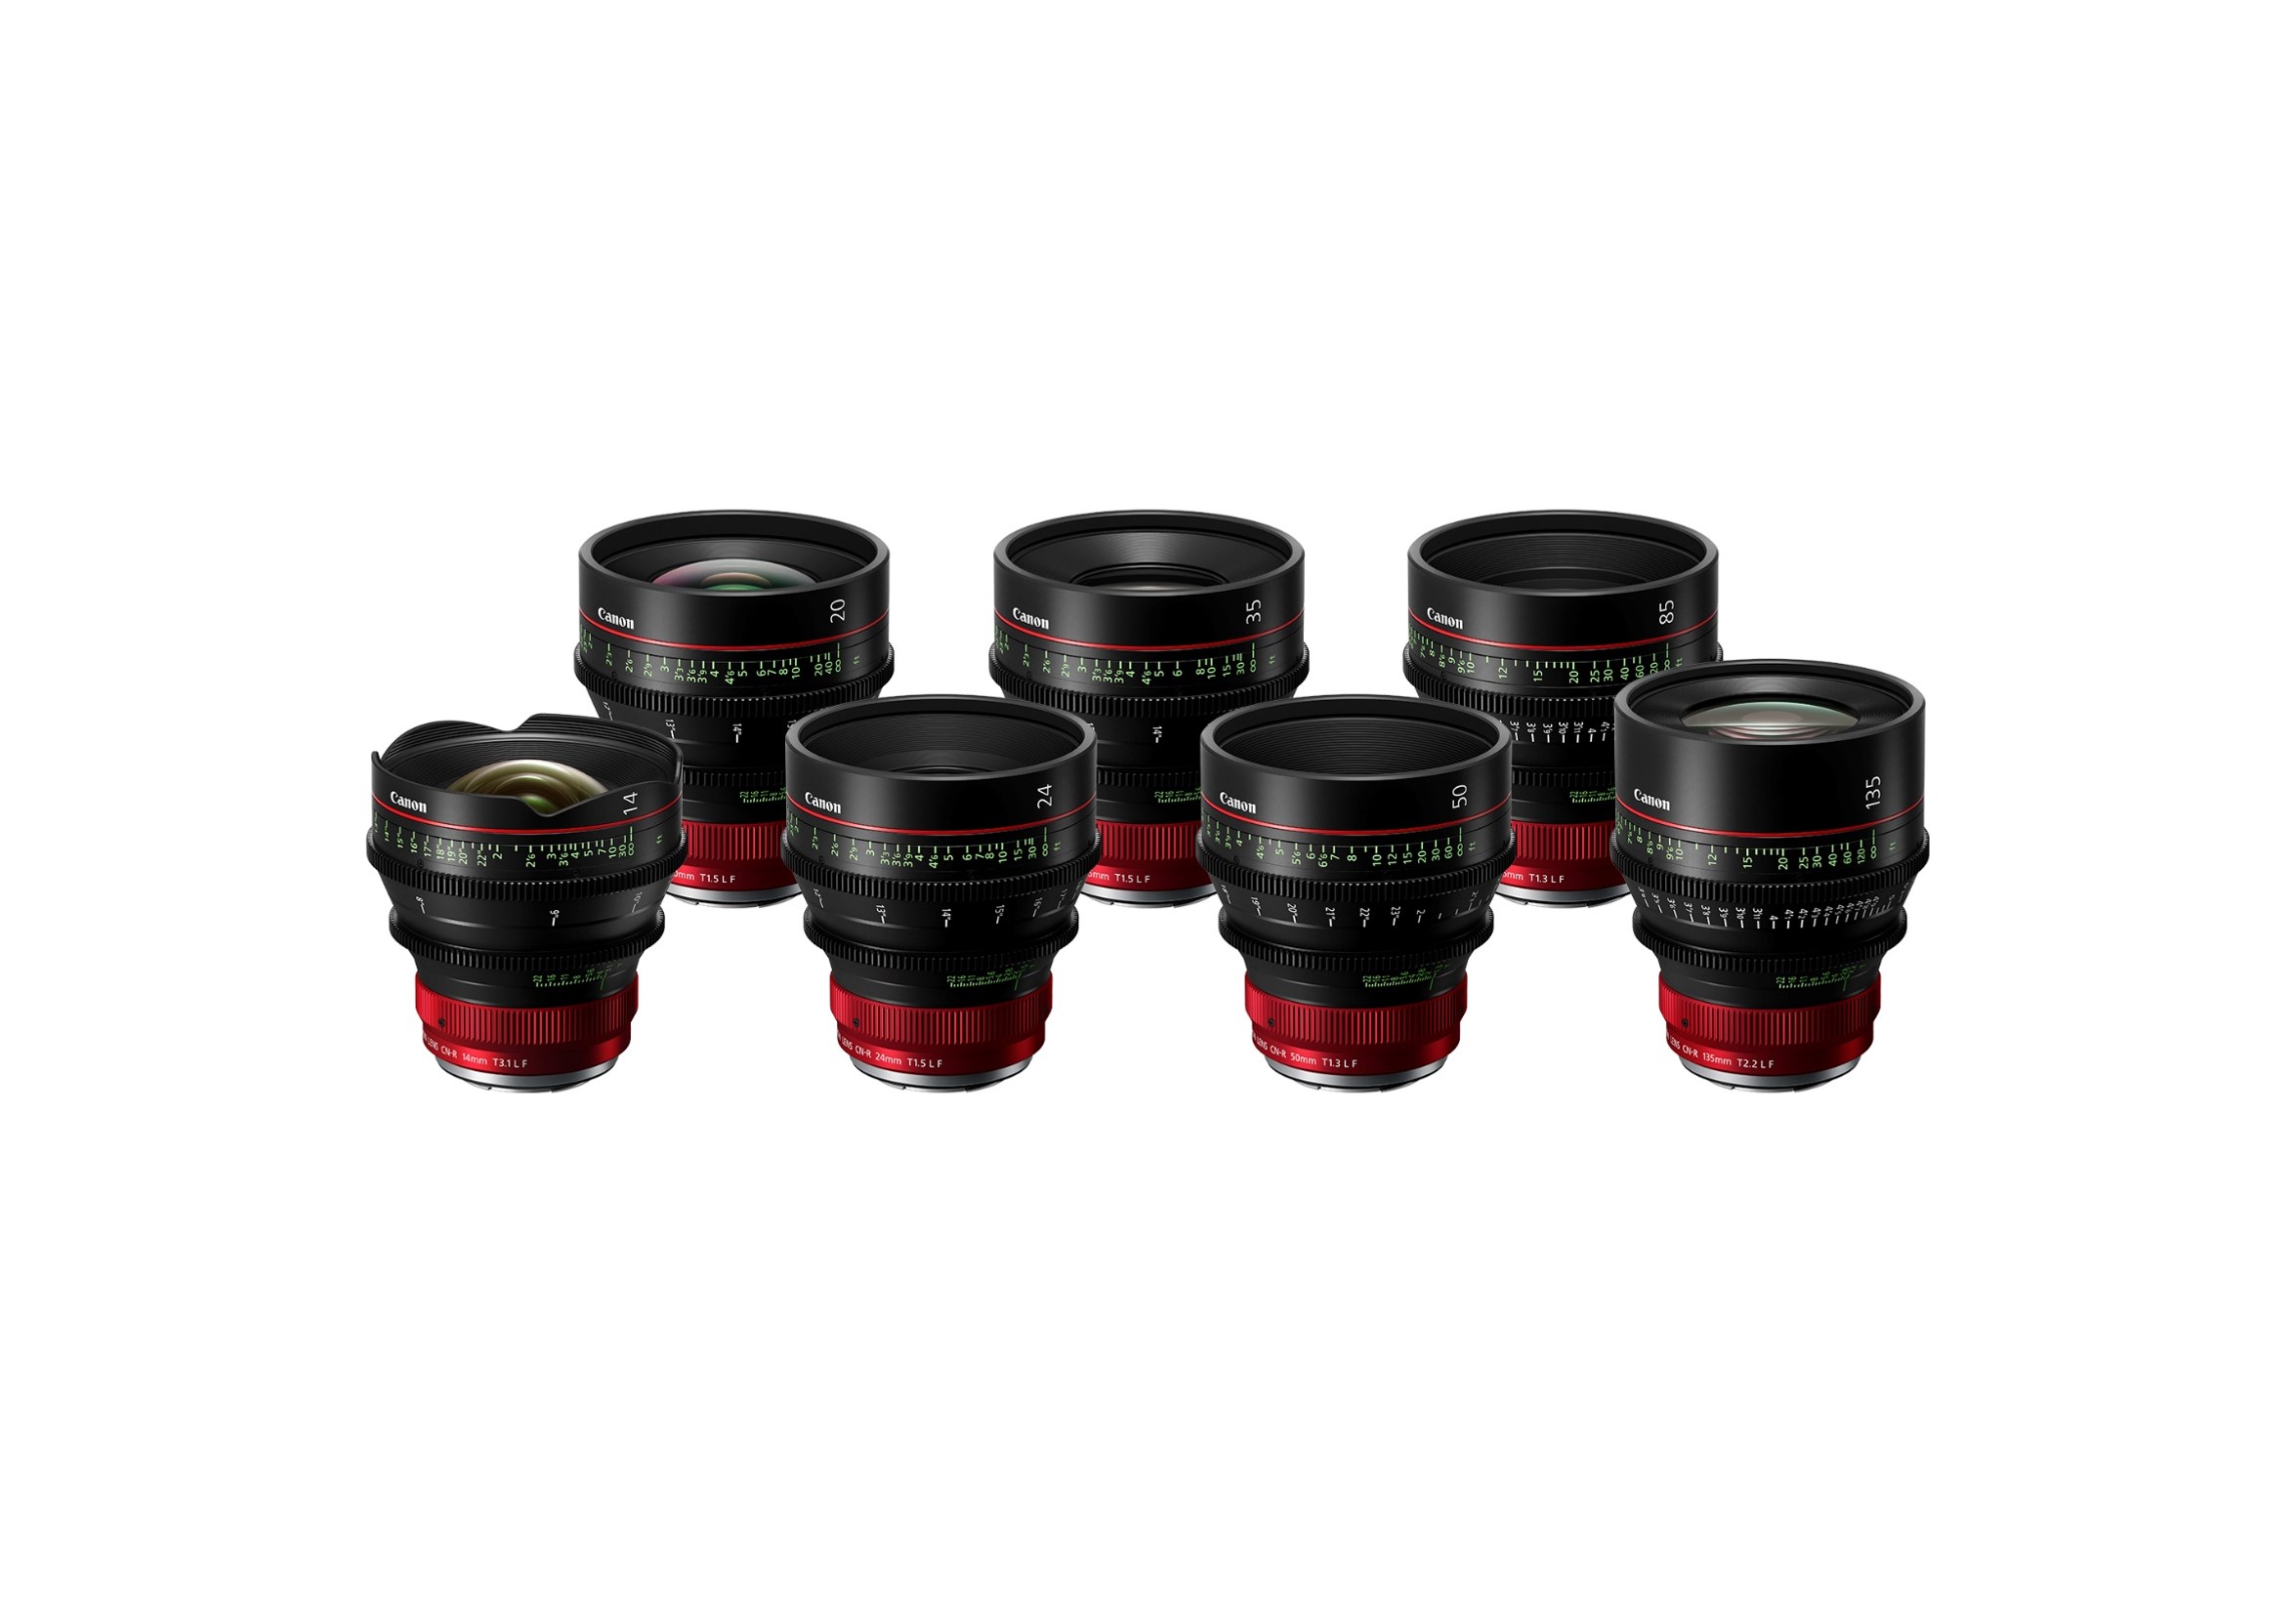 Canon officially launched the New Cinema Prime Lenses with RF Mount Compatible with Super 35mm and Full-frame Camera